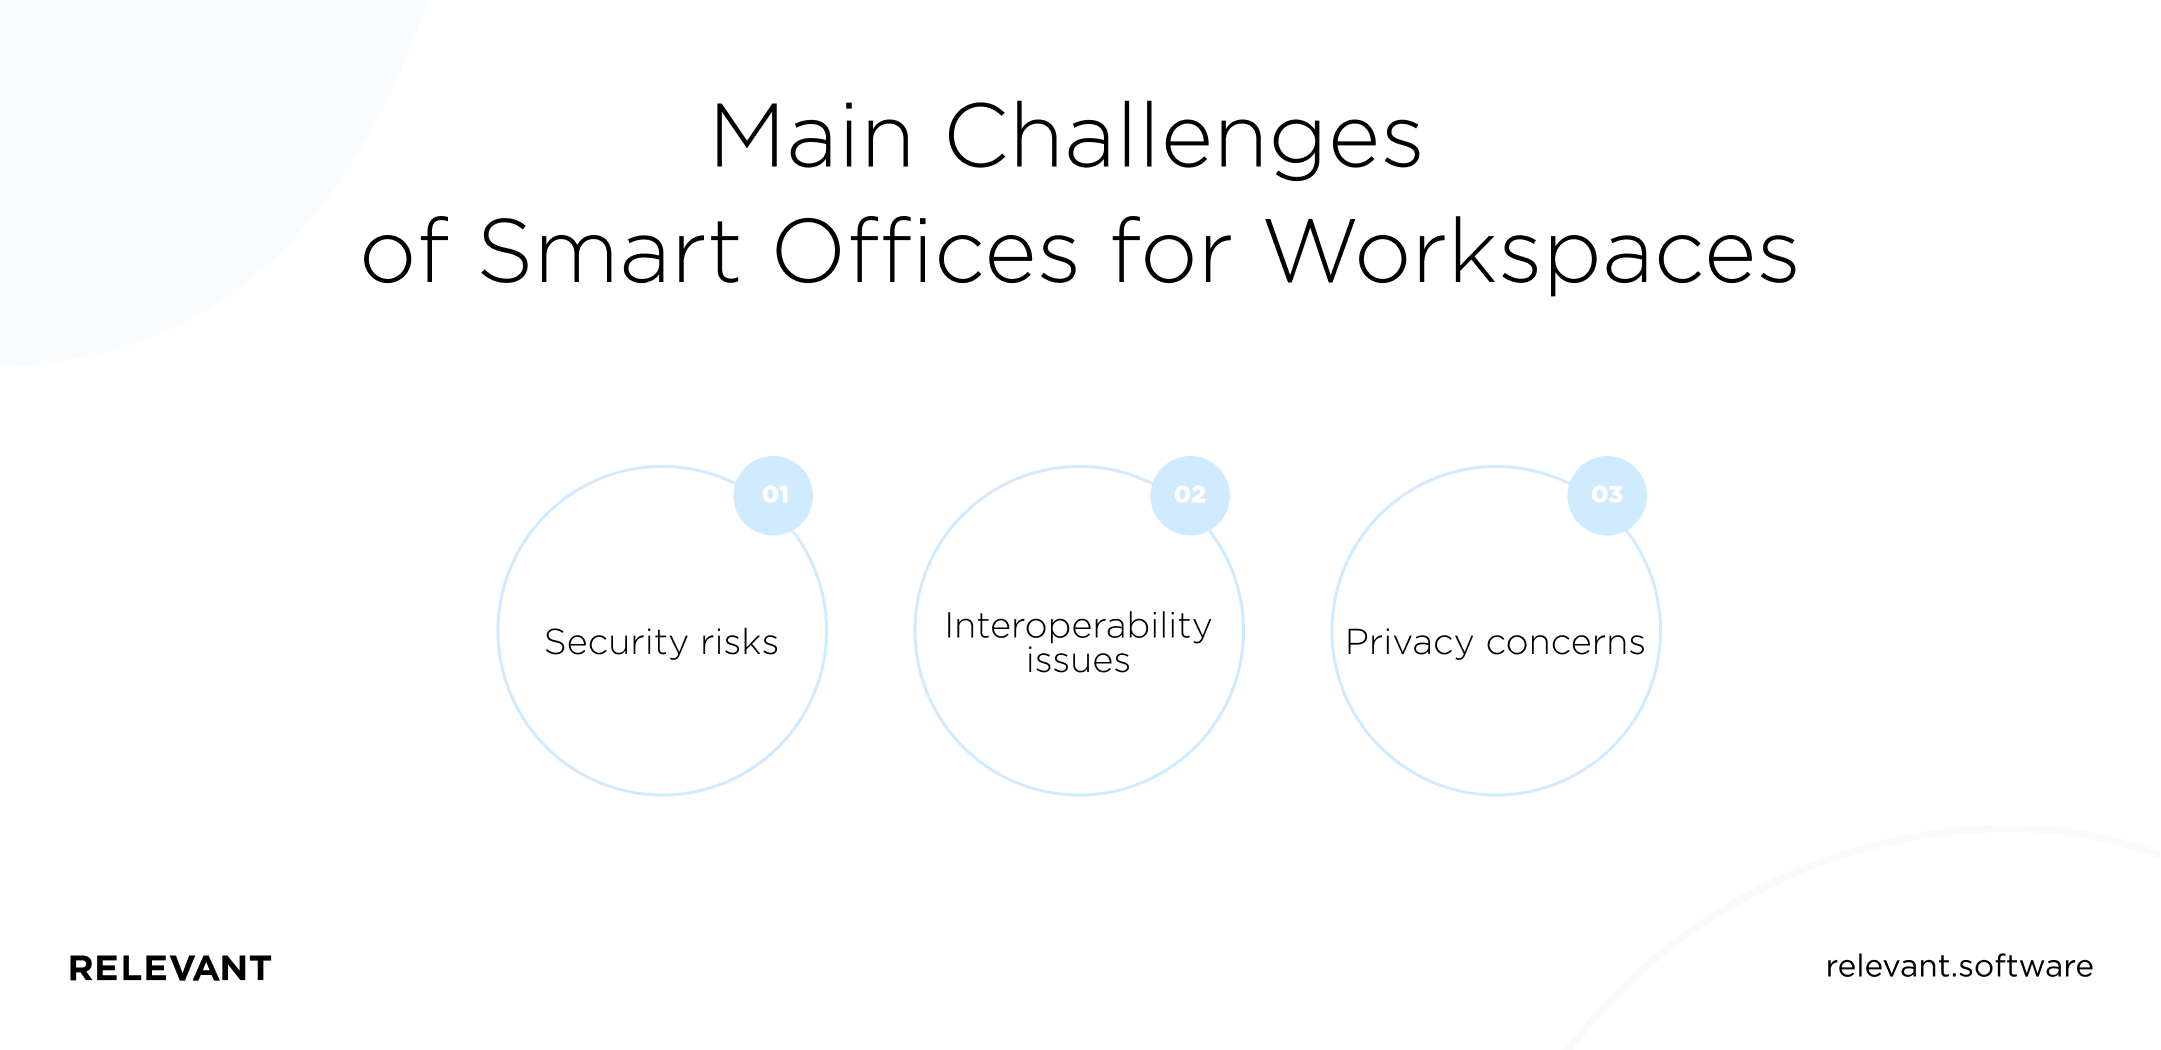 Main Challenges of Smart Offices for Workspaces